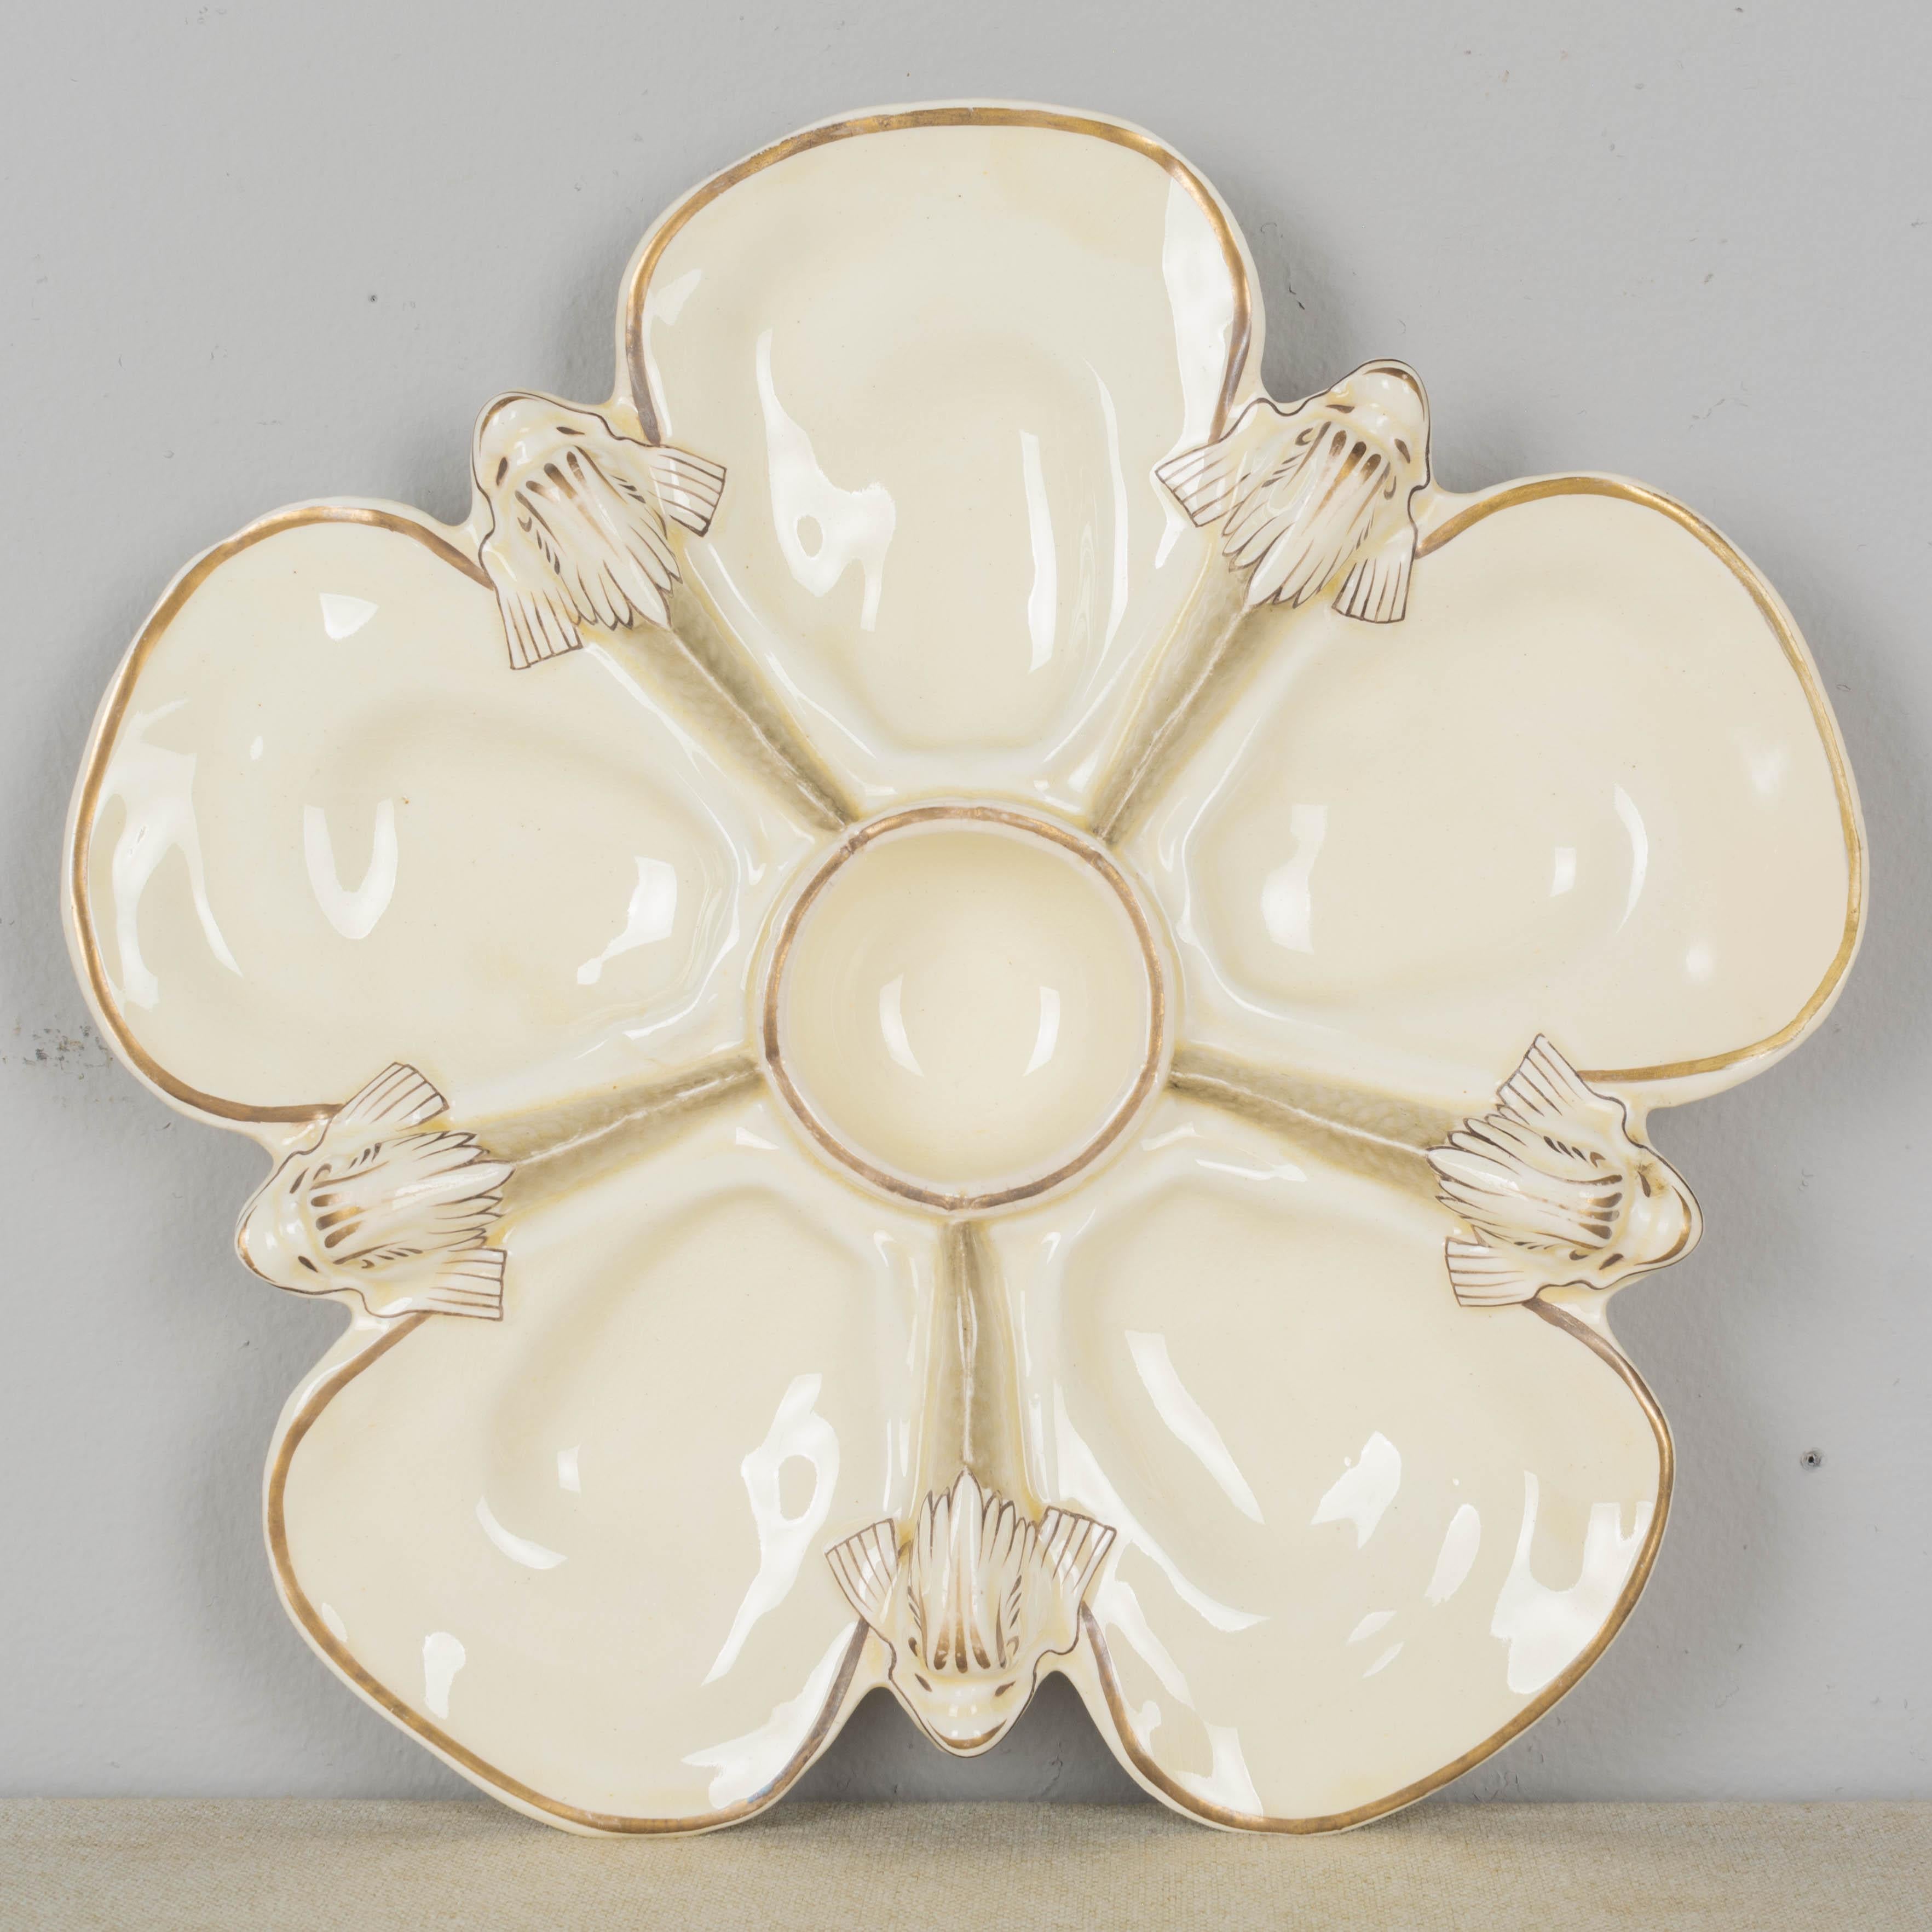 A 19th century English Wedgwood majolica oyster plate, with five oyster shell wells, central well for sauce and five molded dolphins separating each. Light cream color glaze with pale gilt trim. Impressed mark on reverse. Small chip to foot on